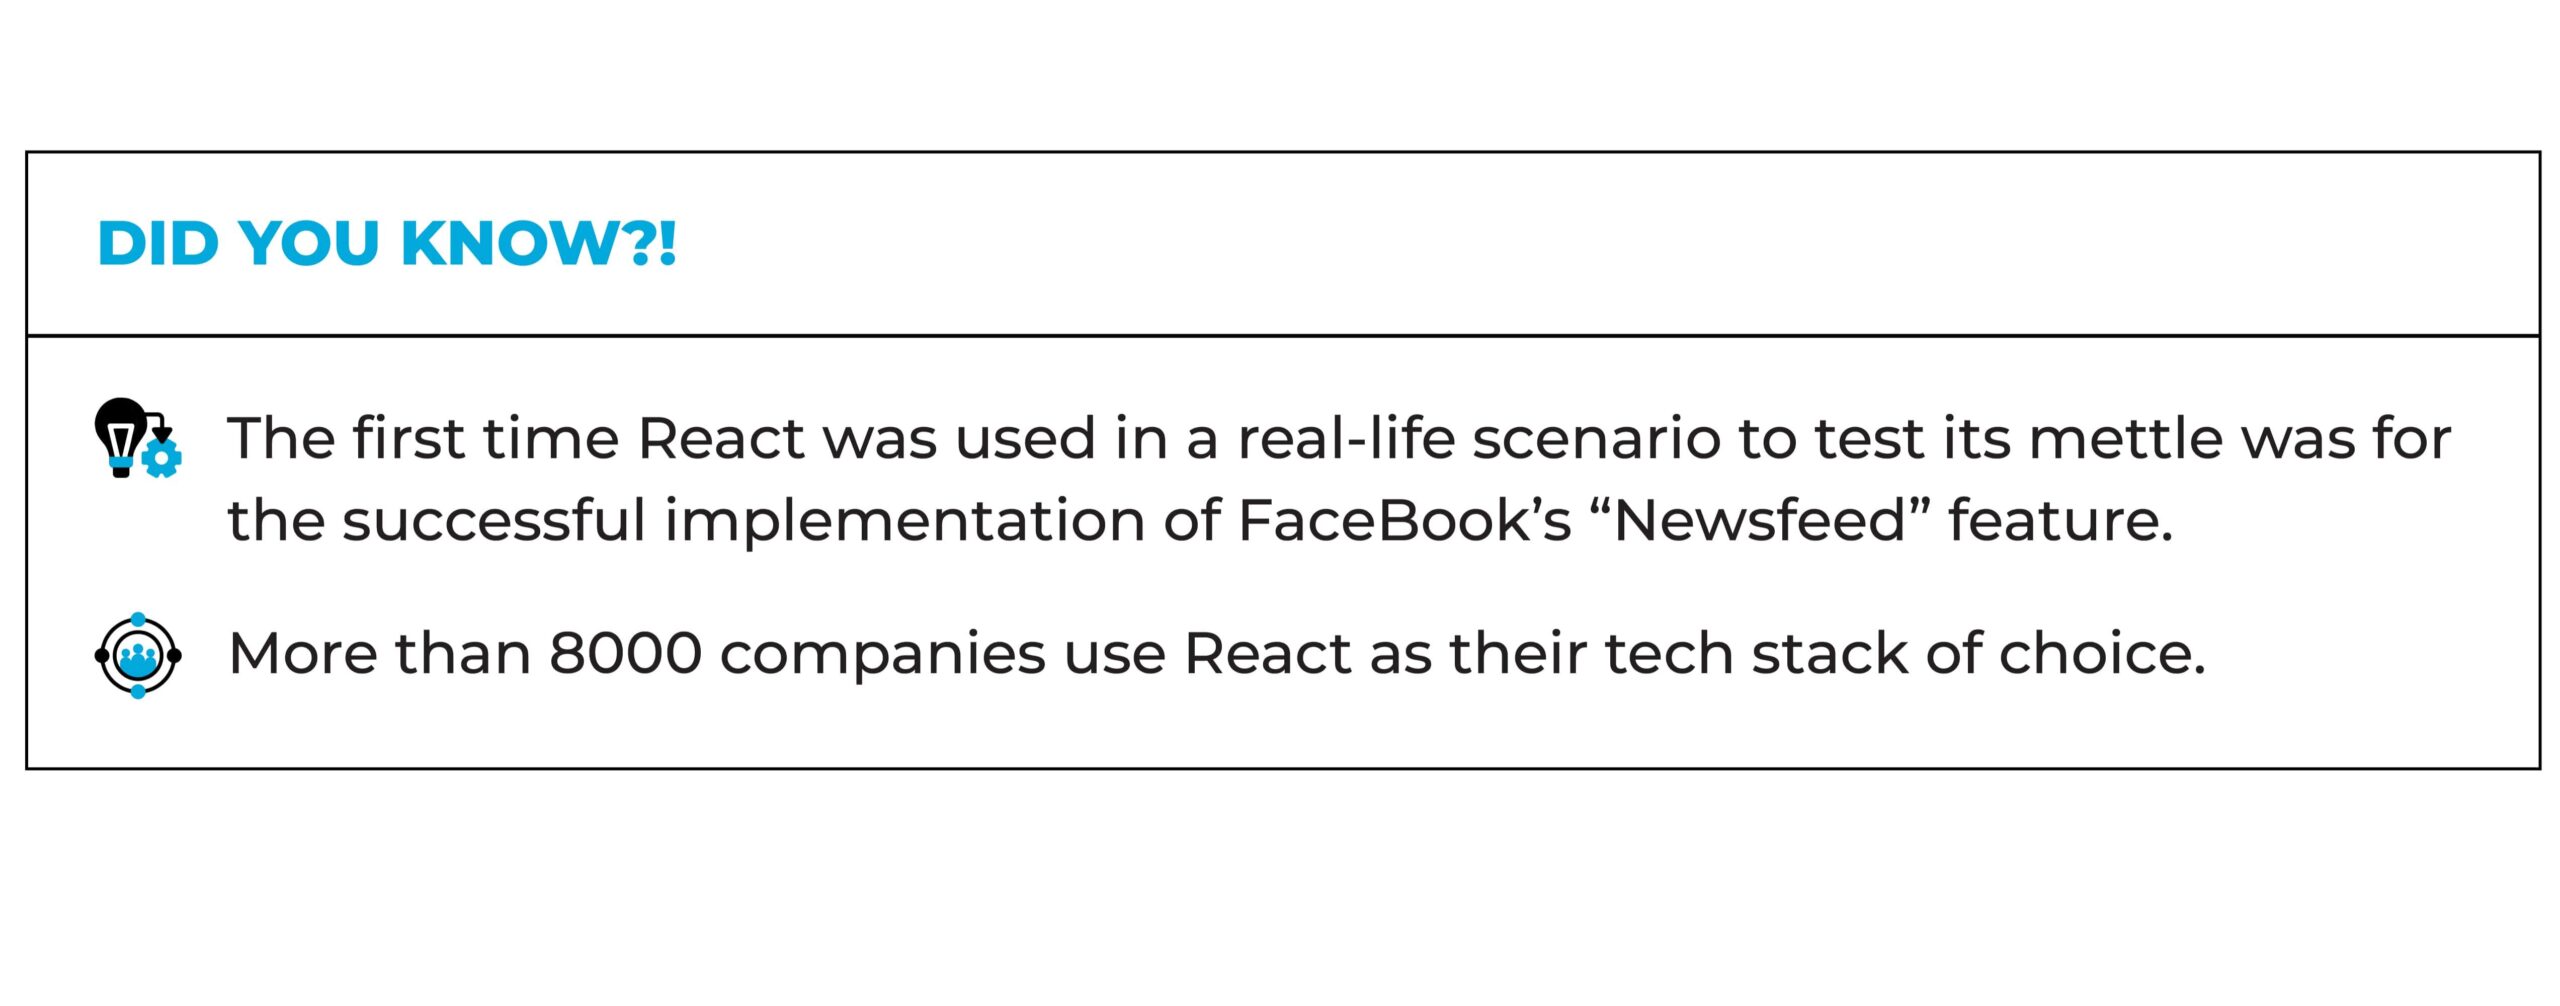 Facts about React Development